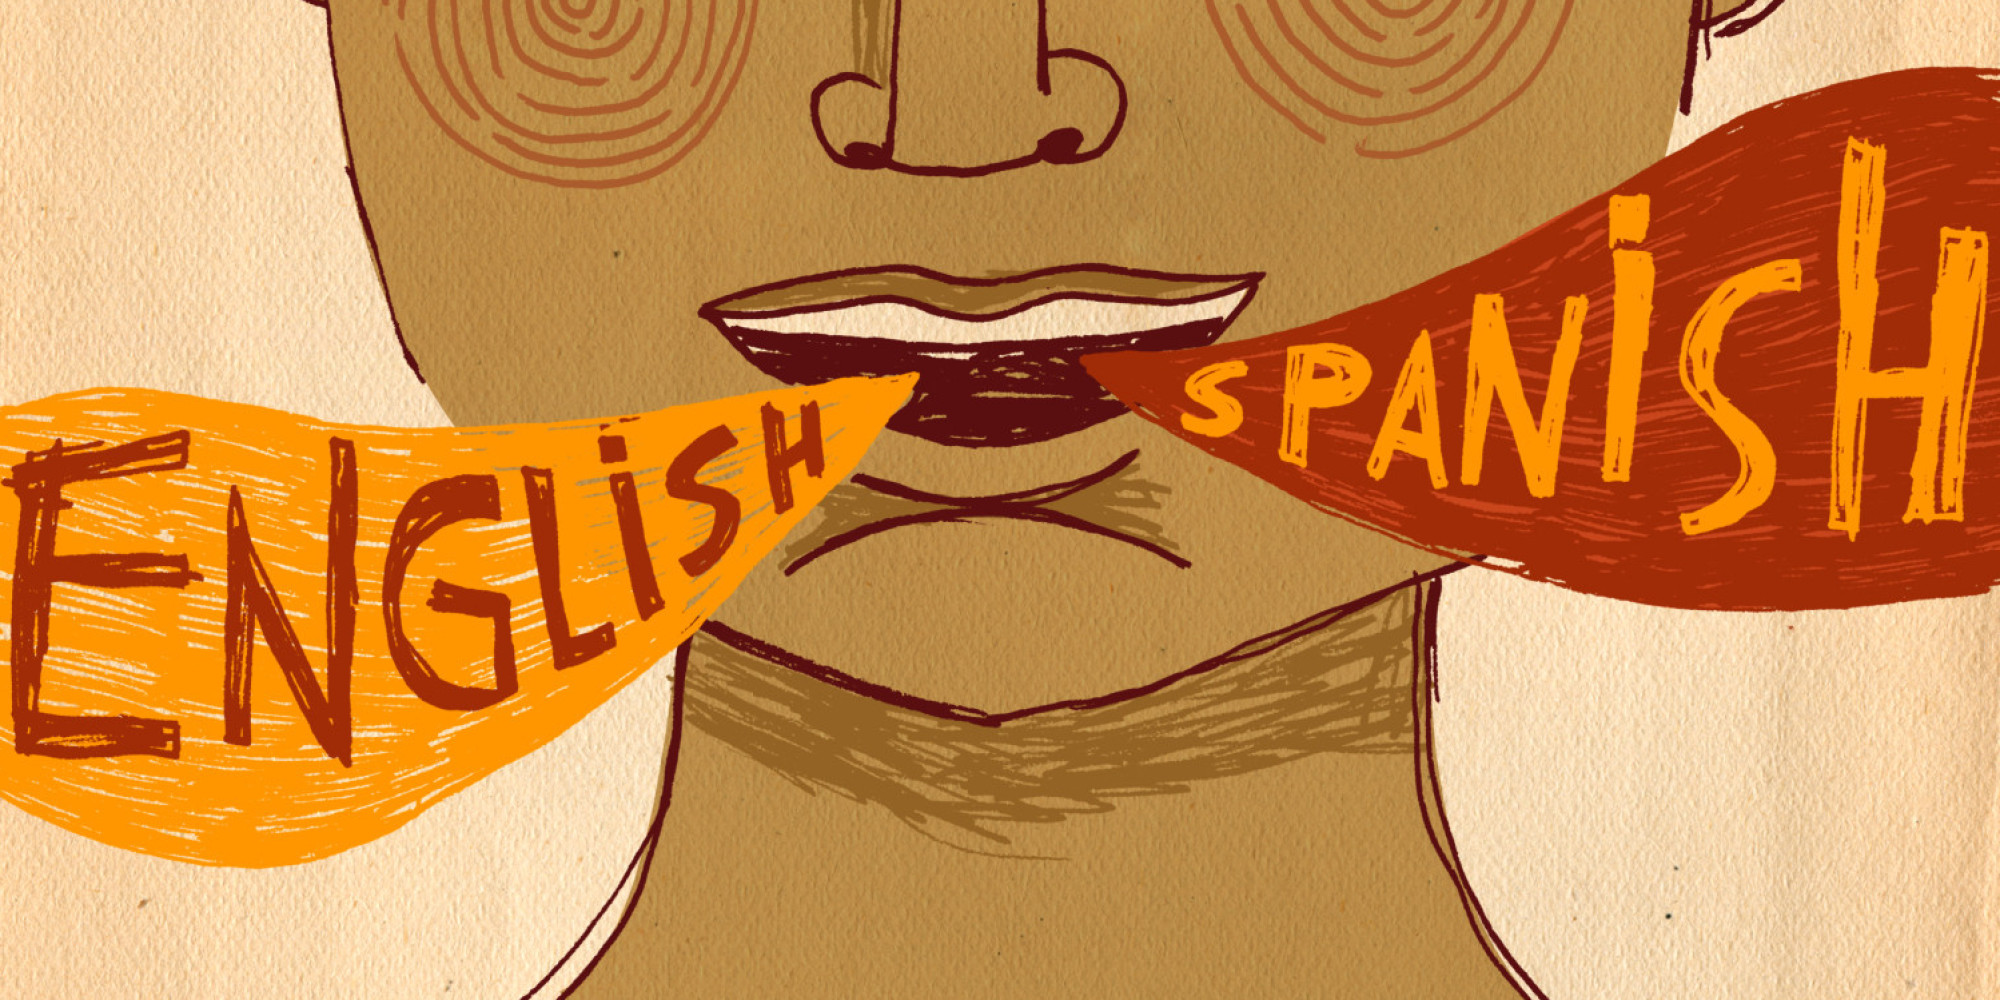 How to say english class in spanish